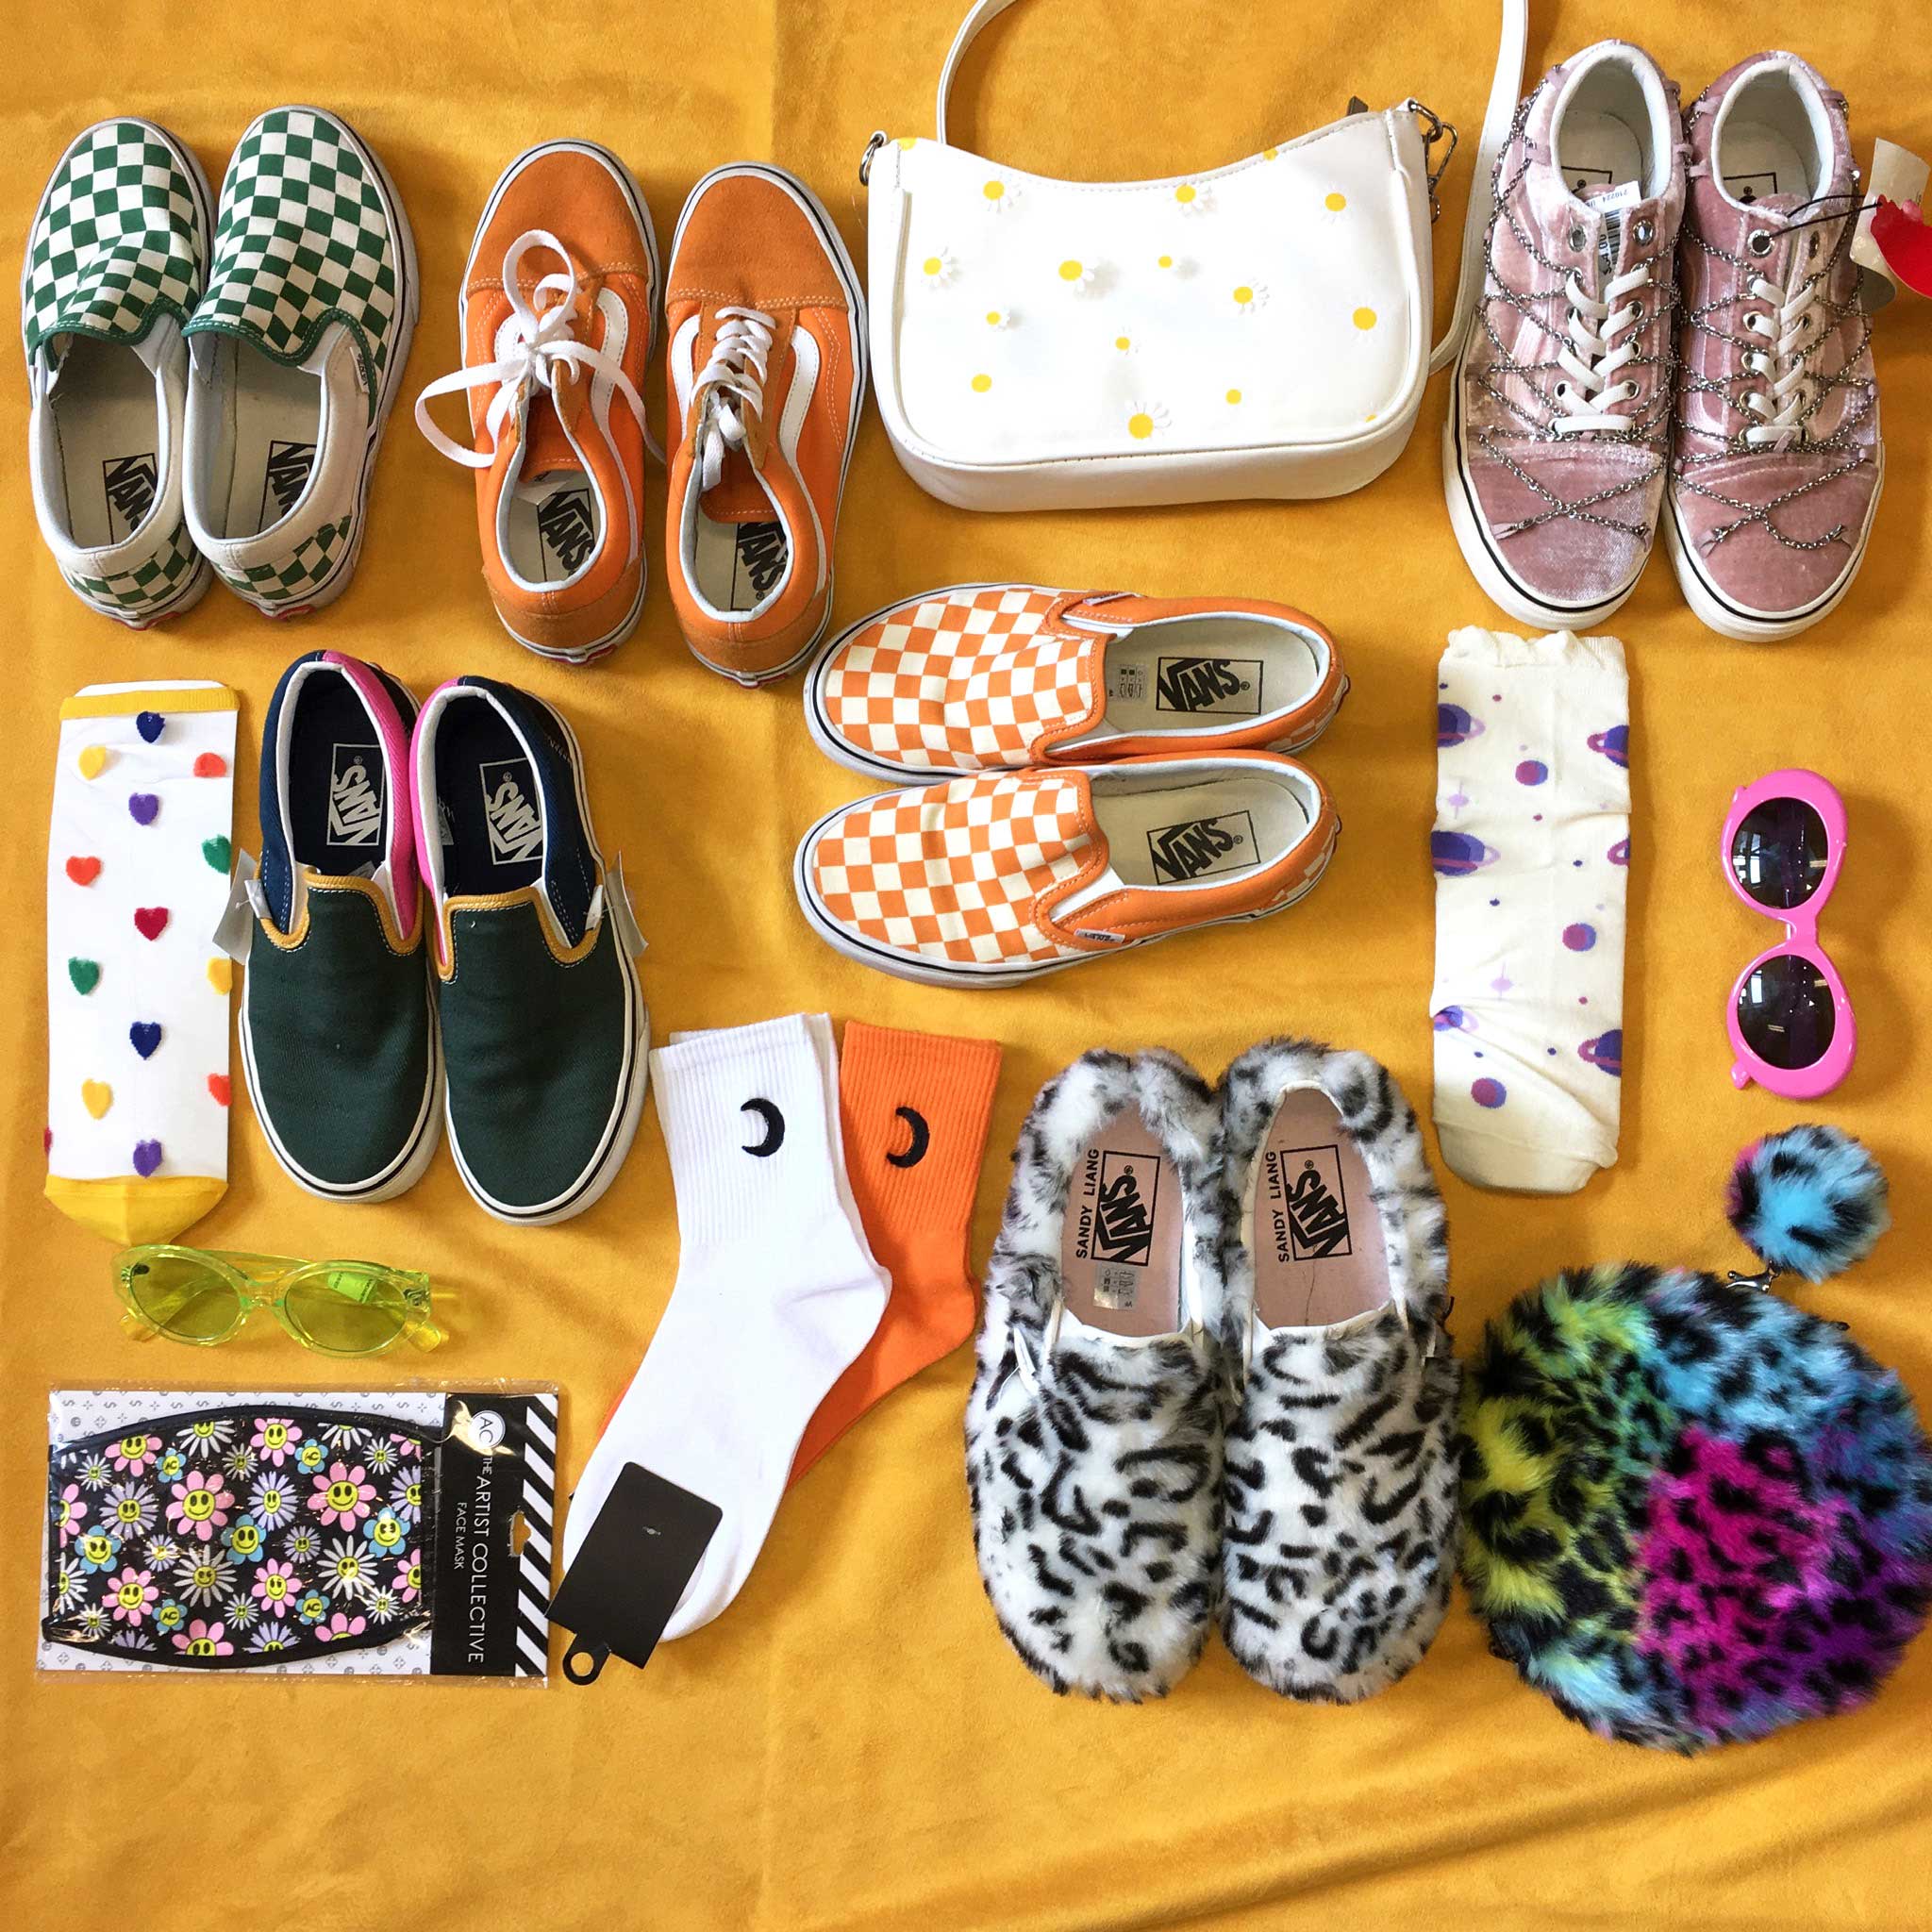 A few pairs of Van's shoes, socks, fun sunglasses and other accessories over a yellow background